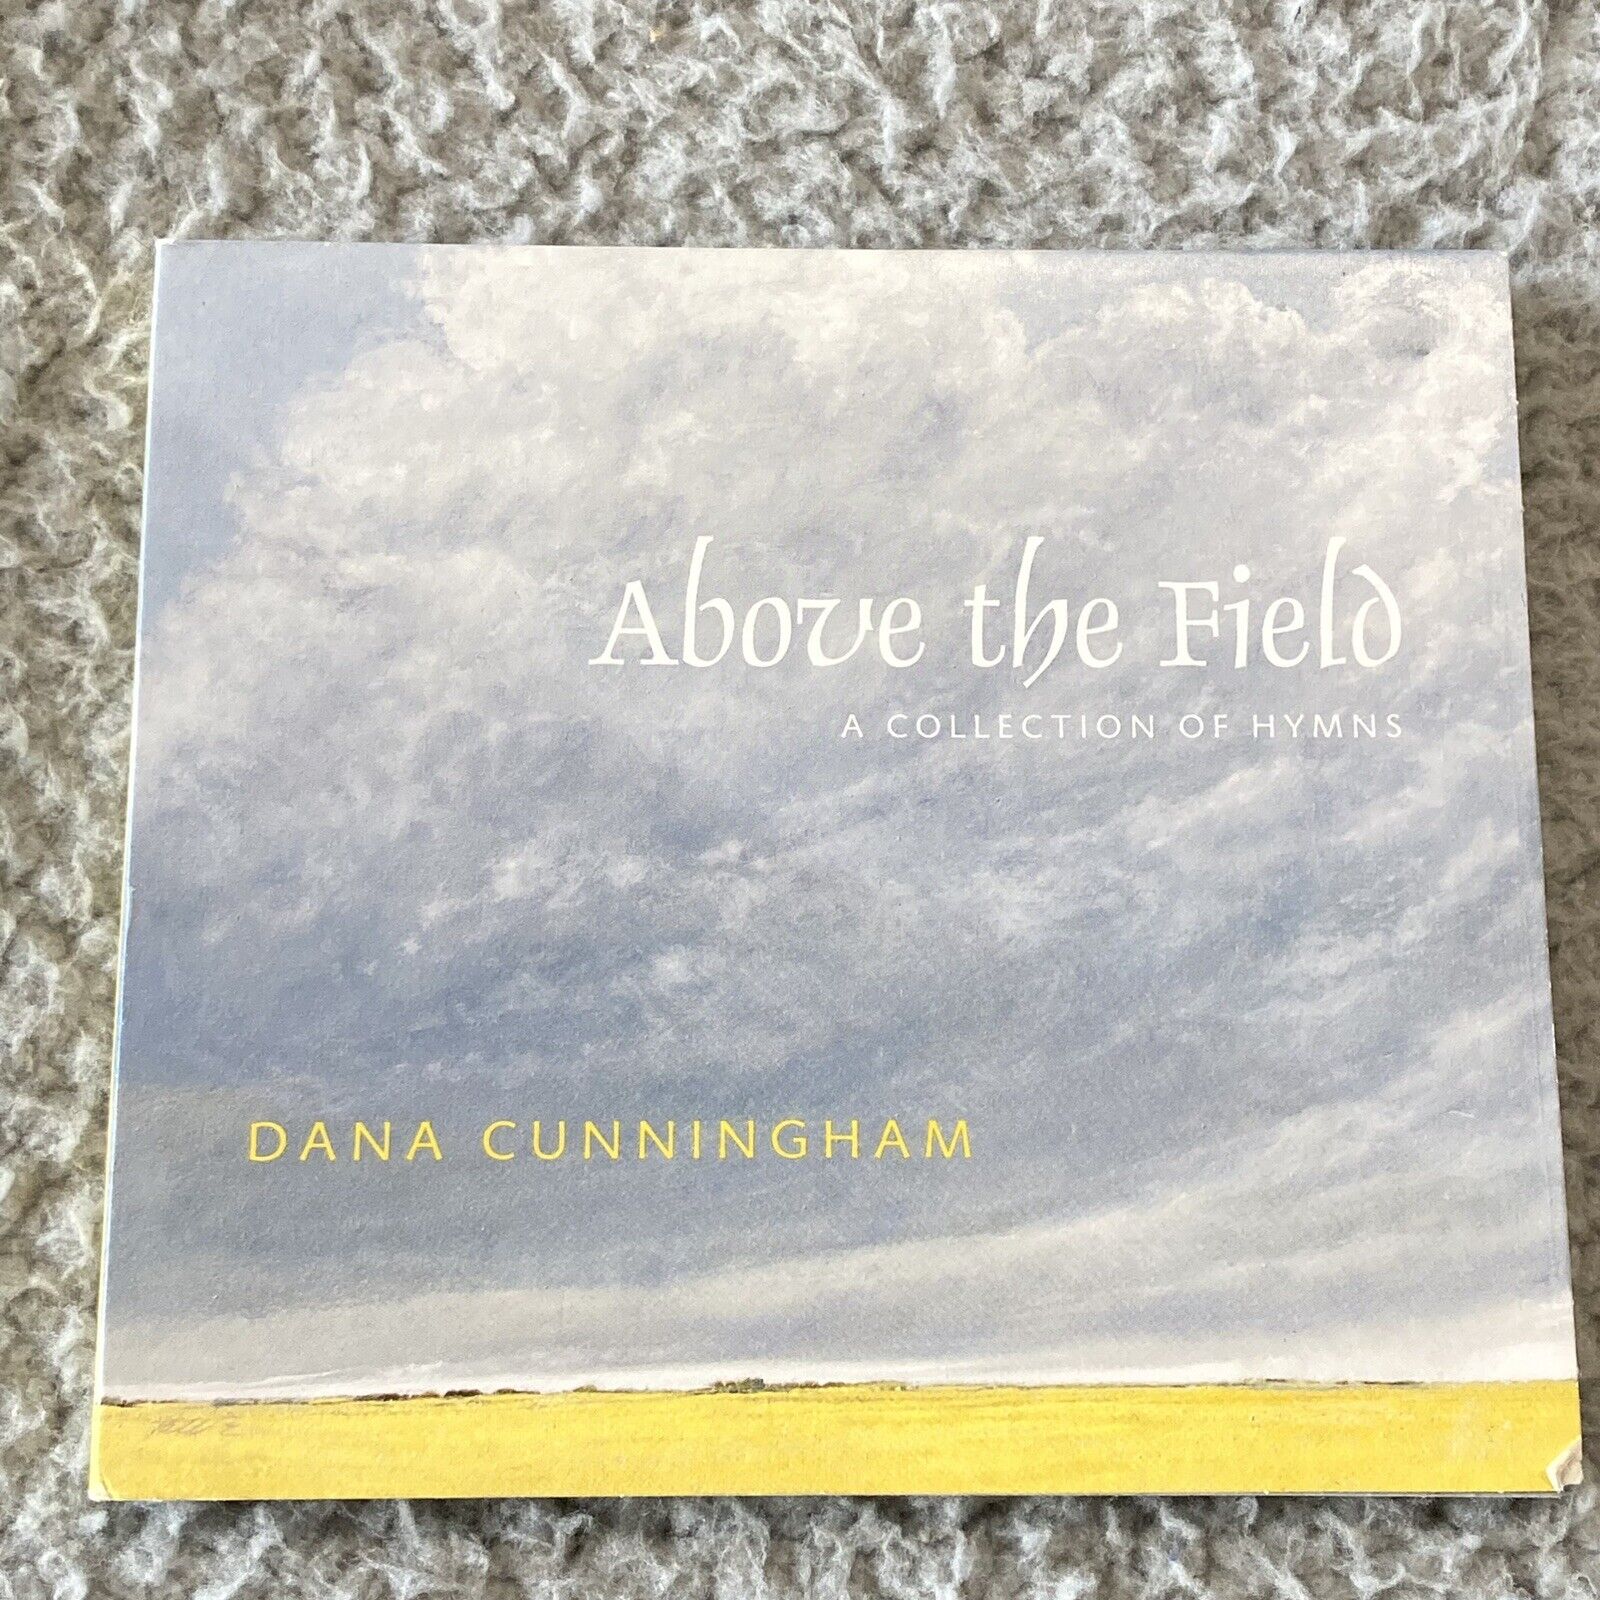 DANA CUNNINGHAM - Above The Field: A Collection Of Hymns - CD - Good Condition